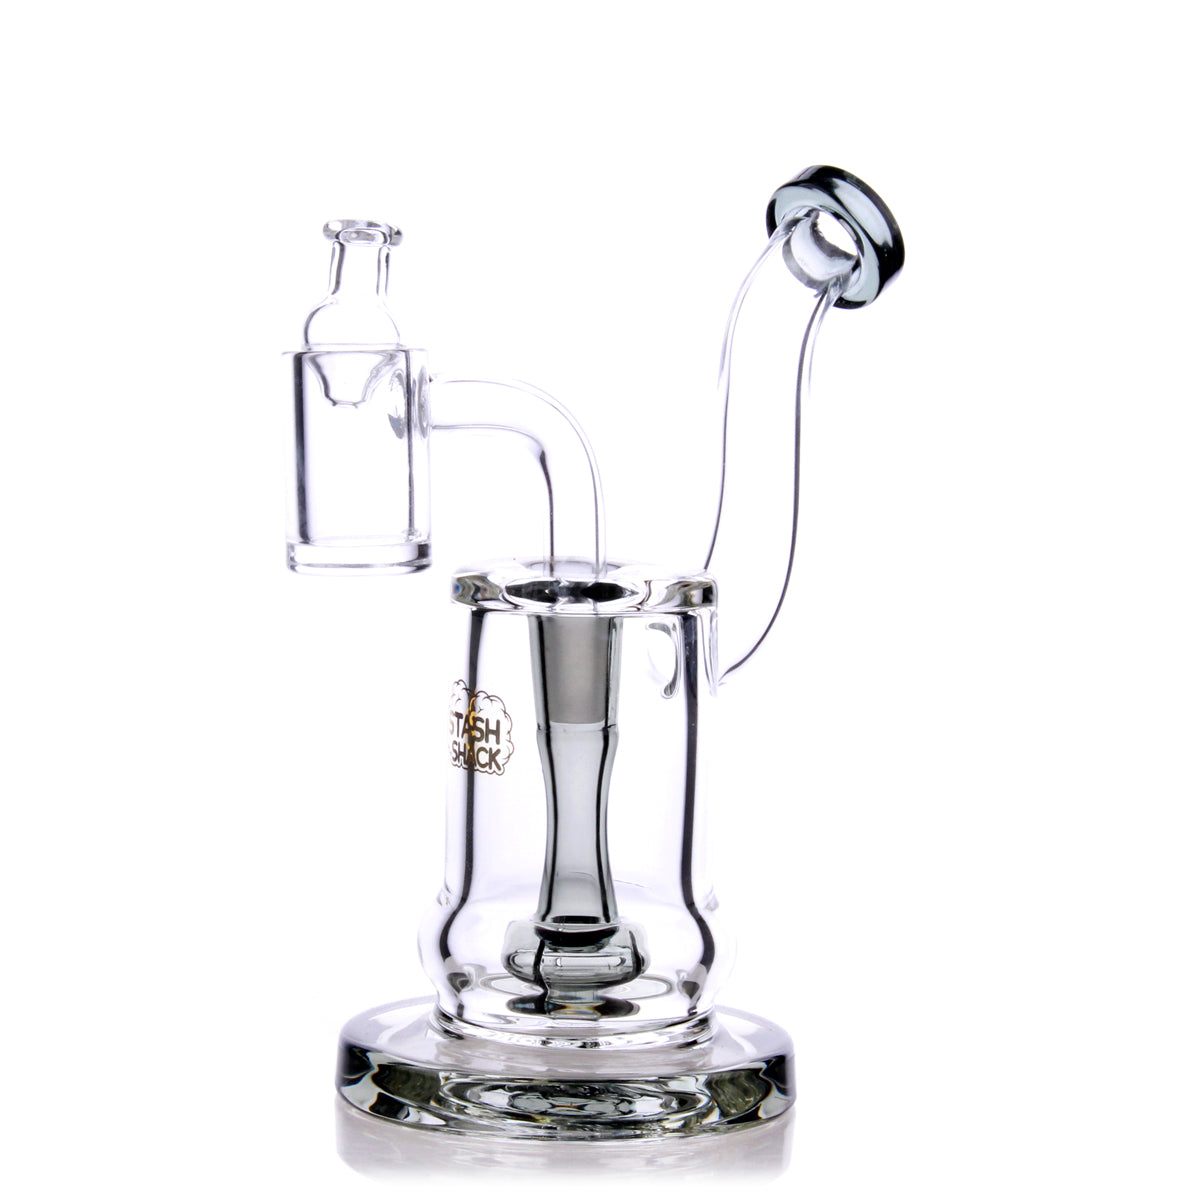 HydroBarrel Mini Rig by The Stash Shack, clear borosilicate glass with showerhead percolator, 5" tall, front view